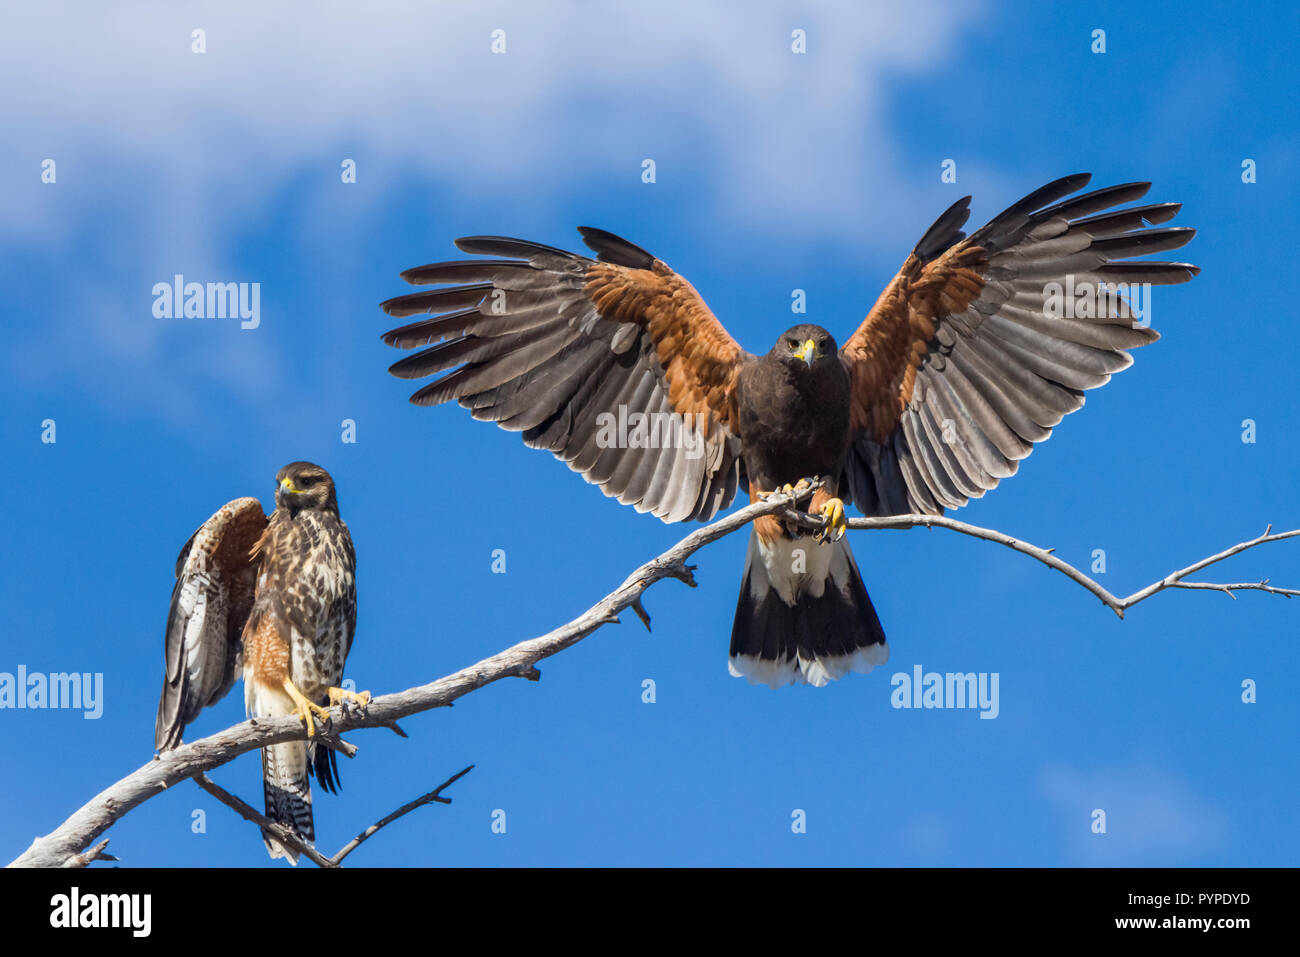 Two Harris Hawks (Parabuteo unicinctus), one immature  and one adult, perched on a tree branch with wings spread against a blue sky in the Sonoran Des Stock Photo